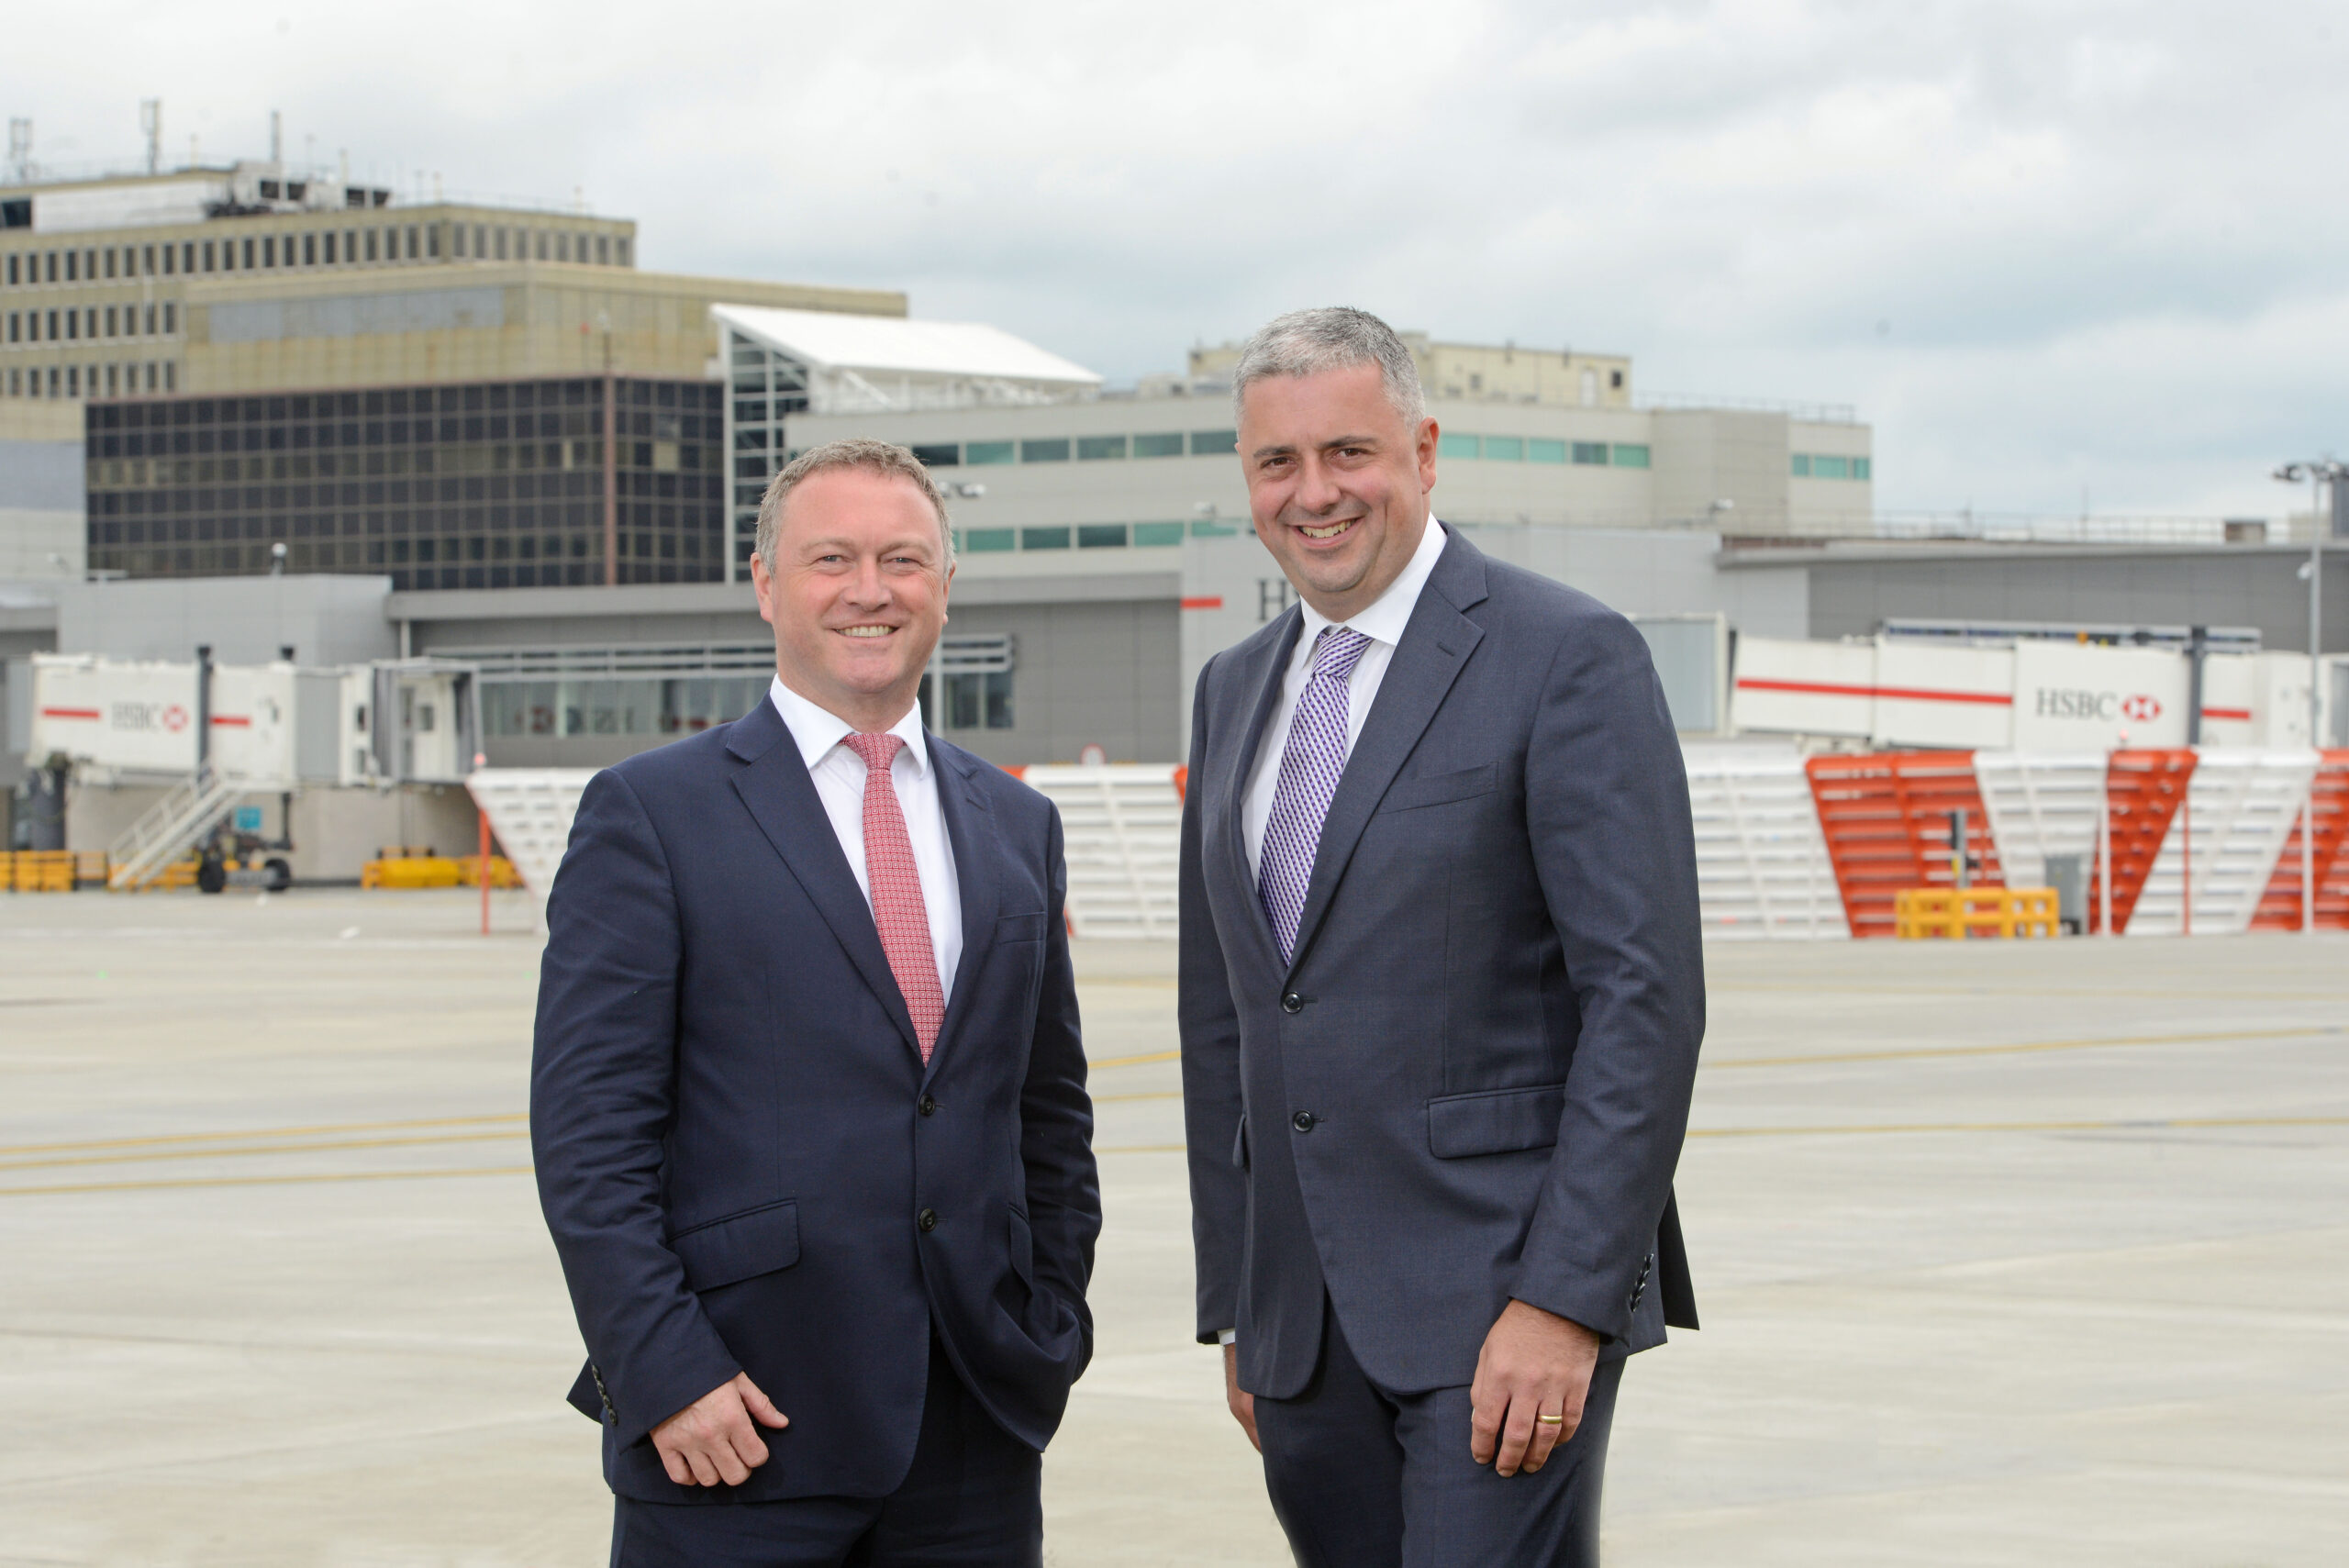 Gatwick marked its busiest-ever May today by launching its new Pier 1 facility – one of largest projects the airport has ever undertaken (£186million) – which houses an entirely new baggage system for the South Terminal and state-of-the-art passenger gate rooms with views across the runway. Pictured: Croydon MP, Steve Reed, and Stewart Wingate, Gatwick CEO outside Pier 1.